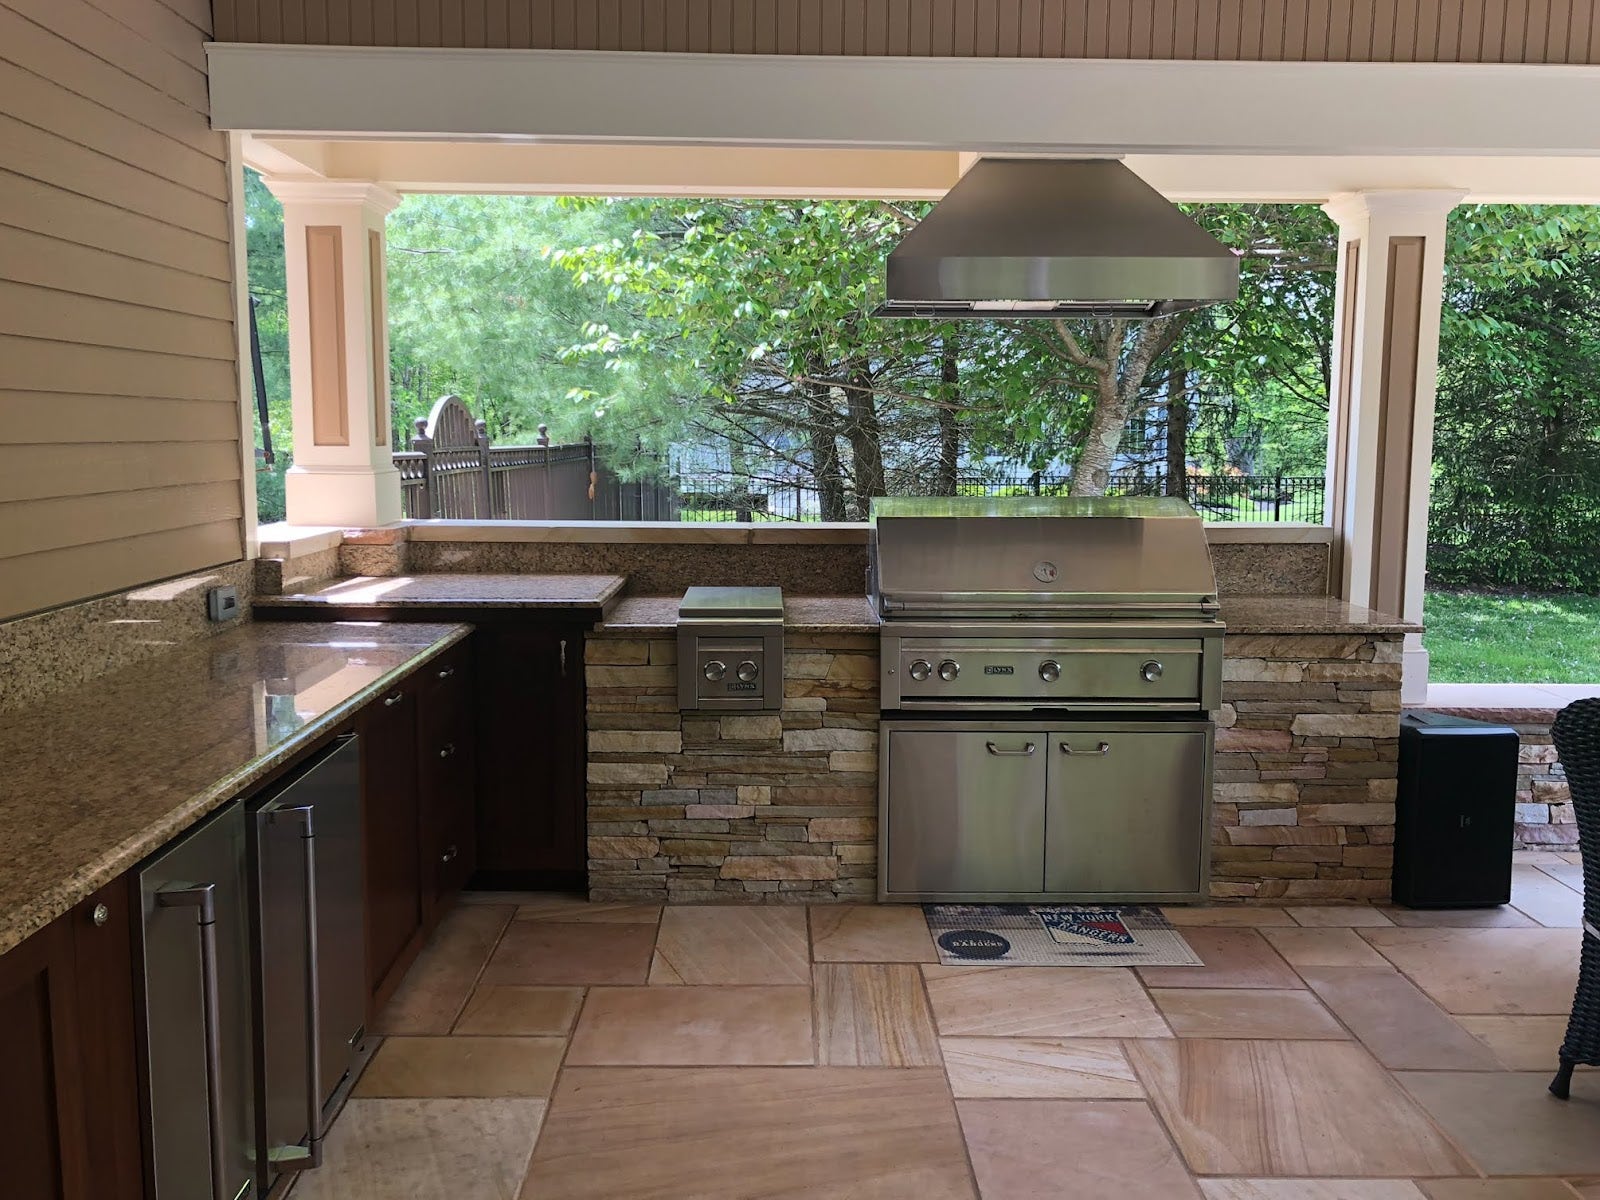 Covered patio kitchen featuring stone accents, modern appliances, and expansive counter space in a serene backyard setting.